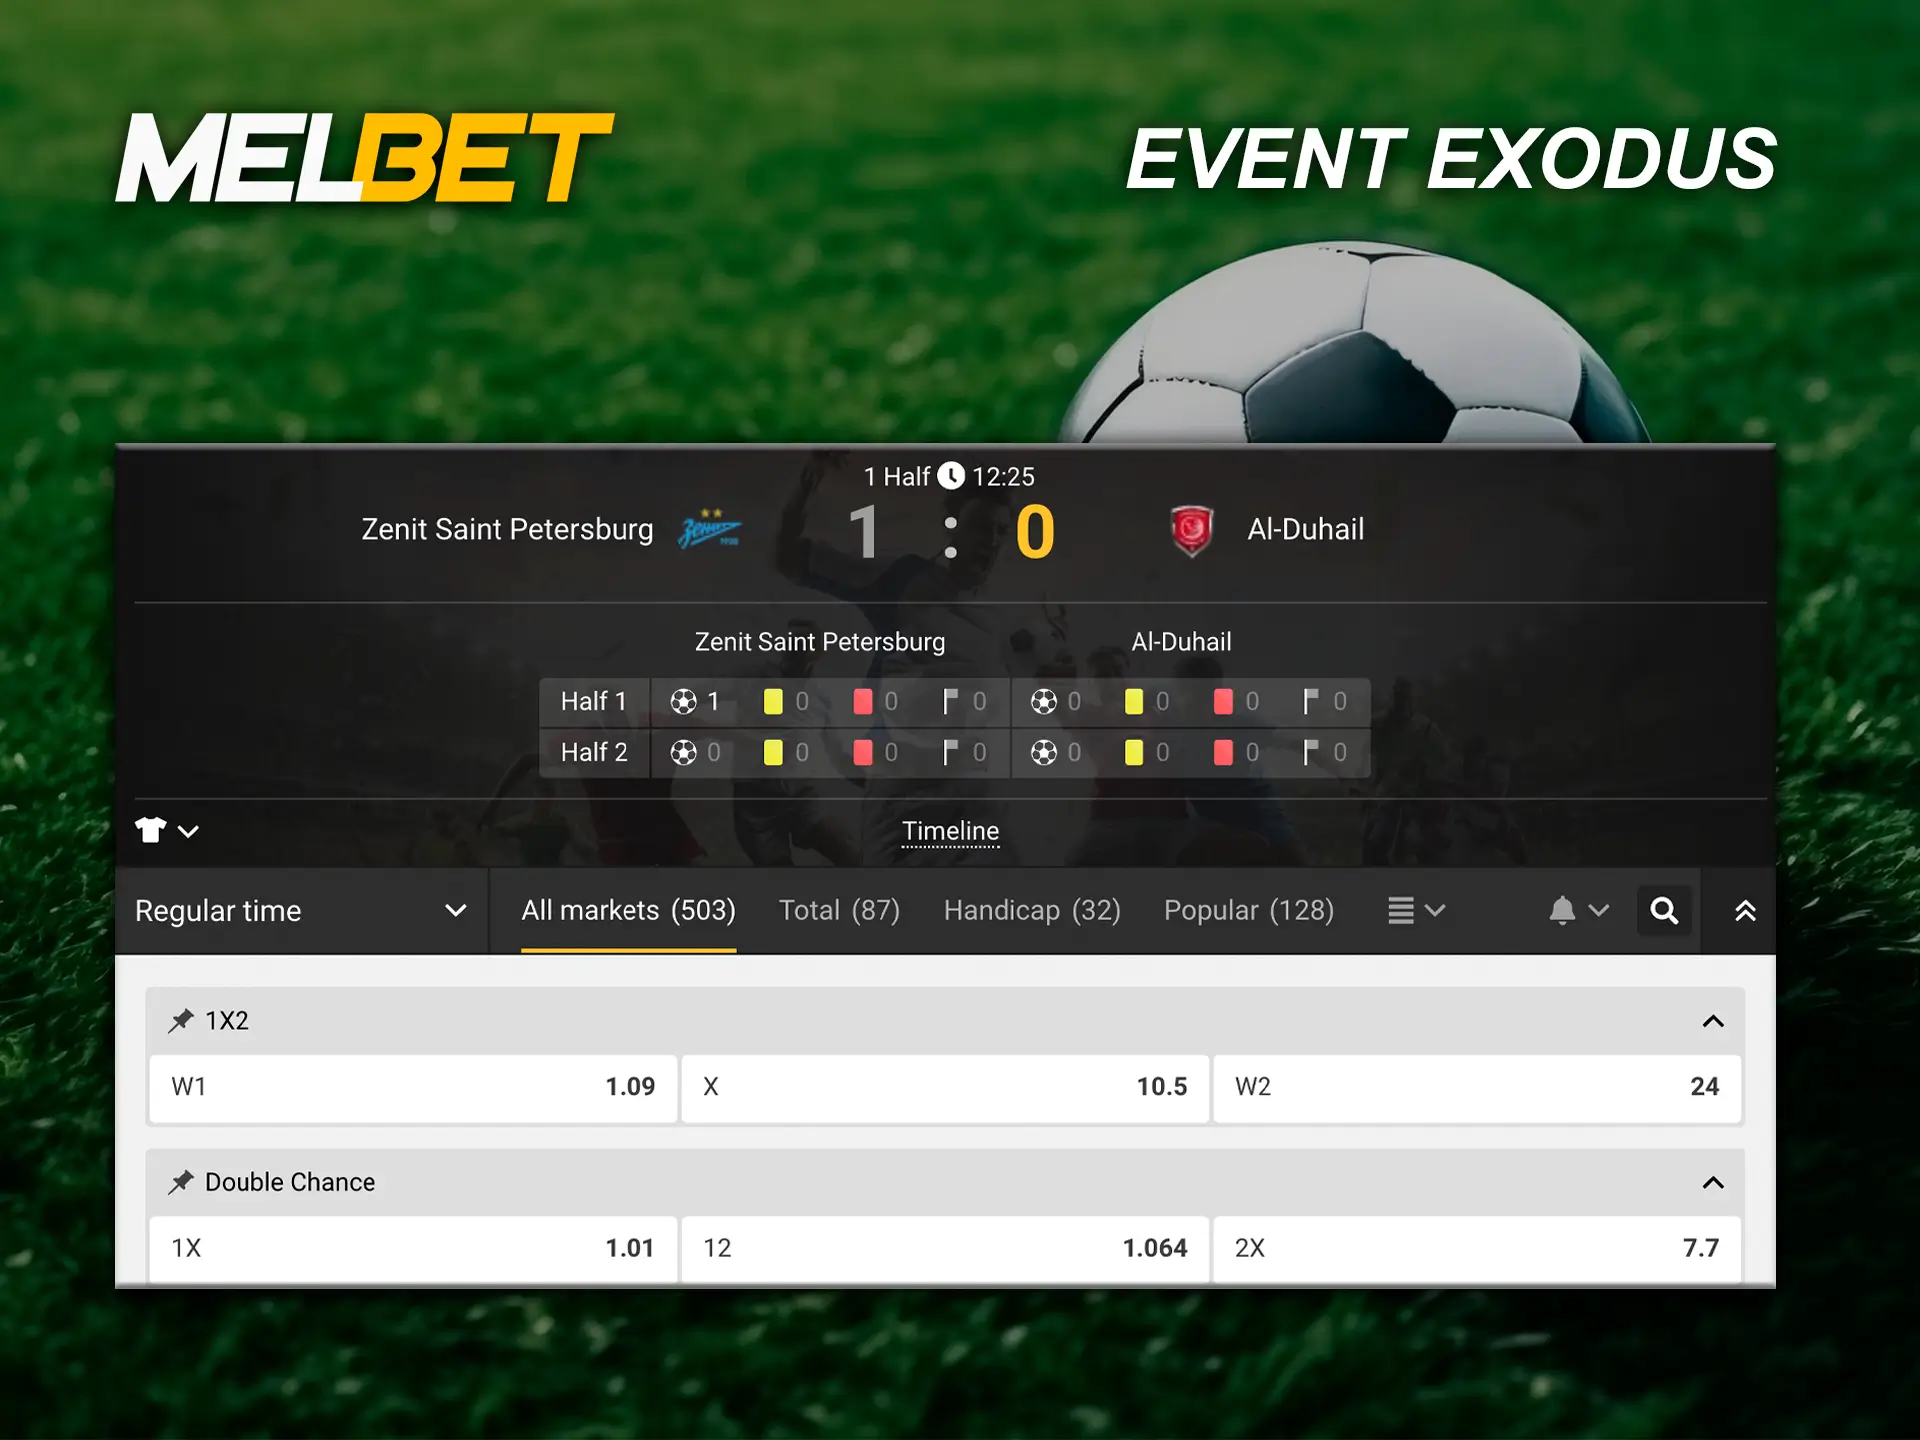 Outcome betting at Melbet is popular among all users as it offers high odds and a chance to win.